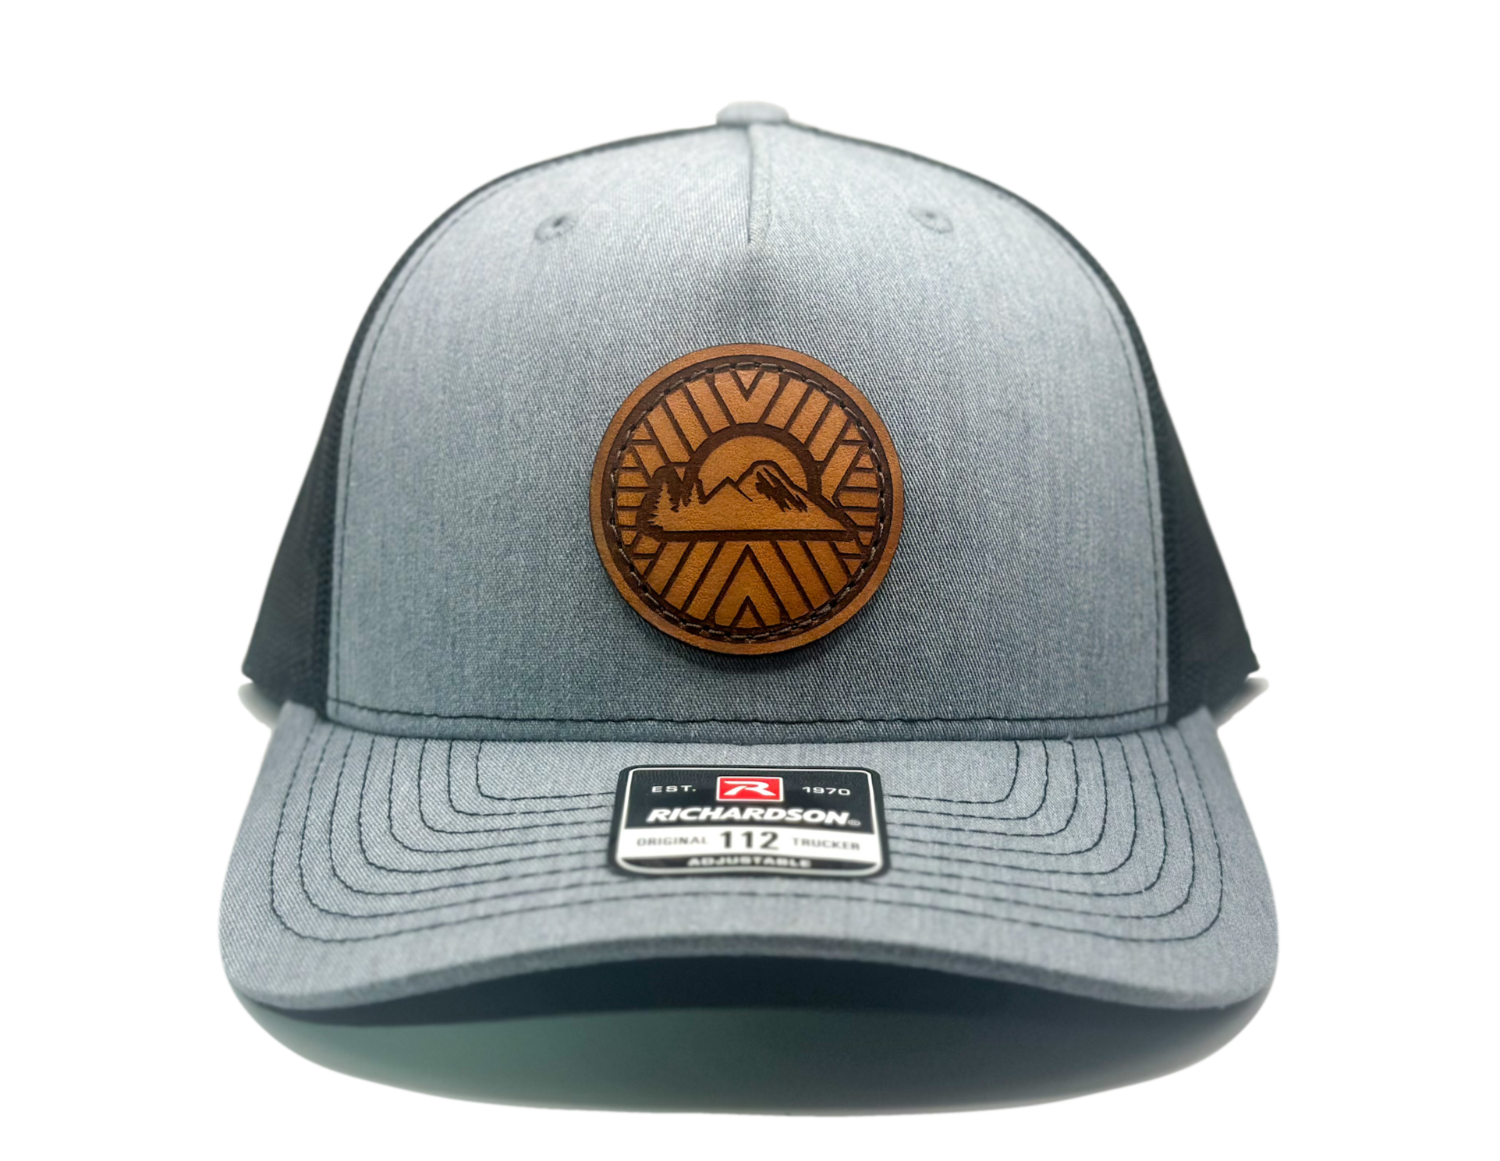 Custom Heather Grey Richardson Leather Patch hat. Our custom designed leather patch is laser engraved and sewn onto a Richardson 112 Hat. We use full-grain, veg tanned leather. Our custom leather patches are handmade and designed in Colorado, USA.